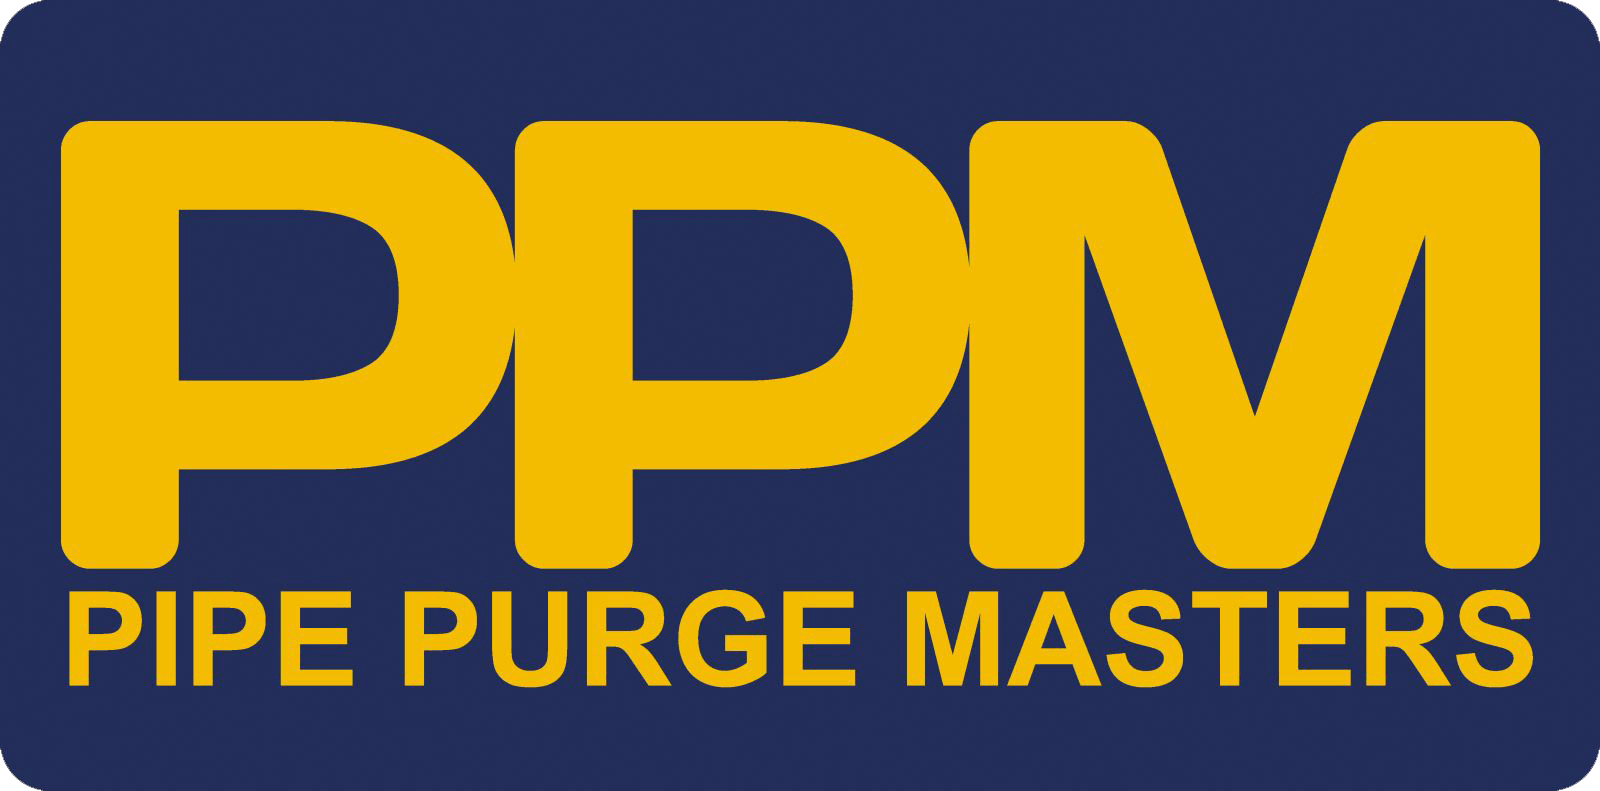 PPM Pipe Purge Masters logo